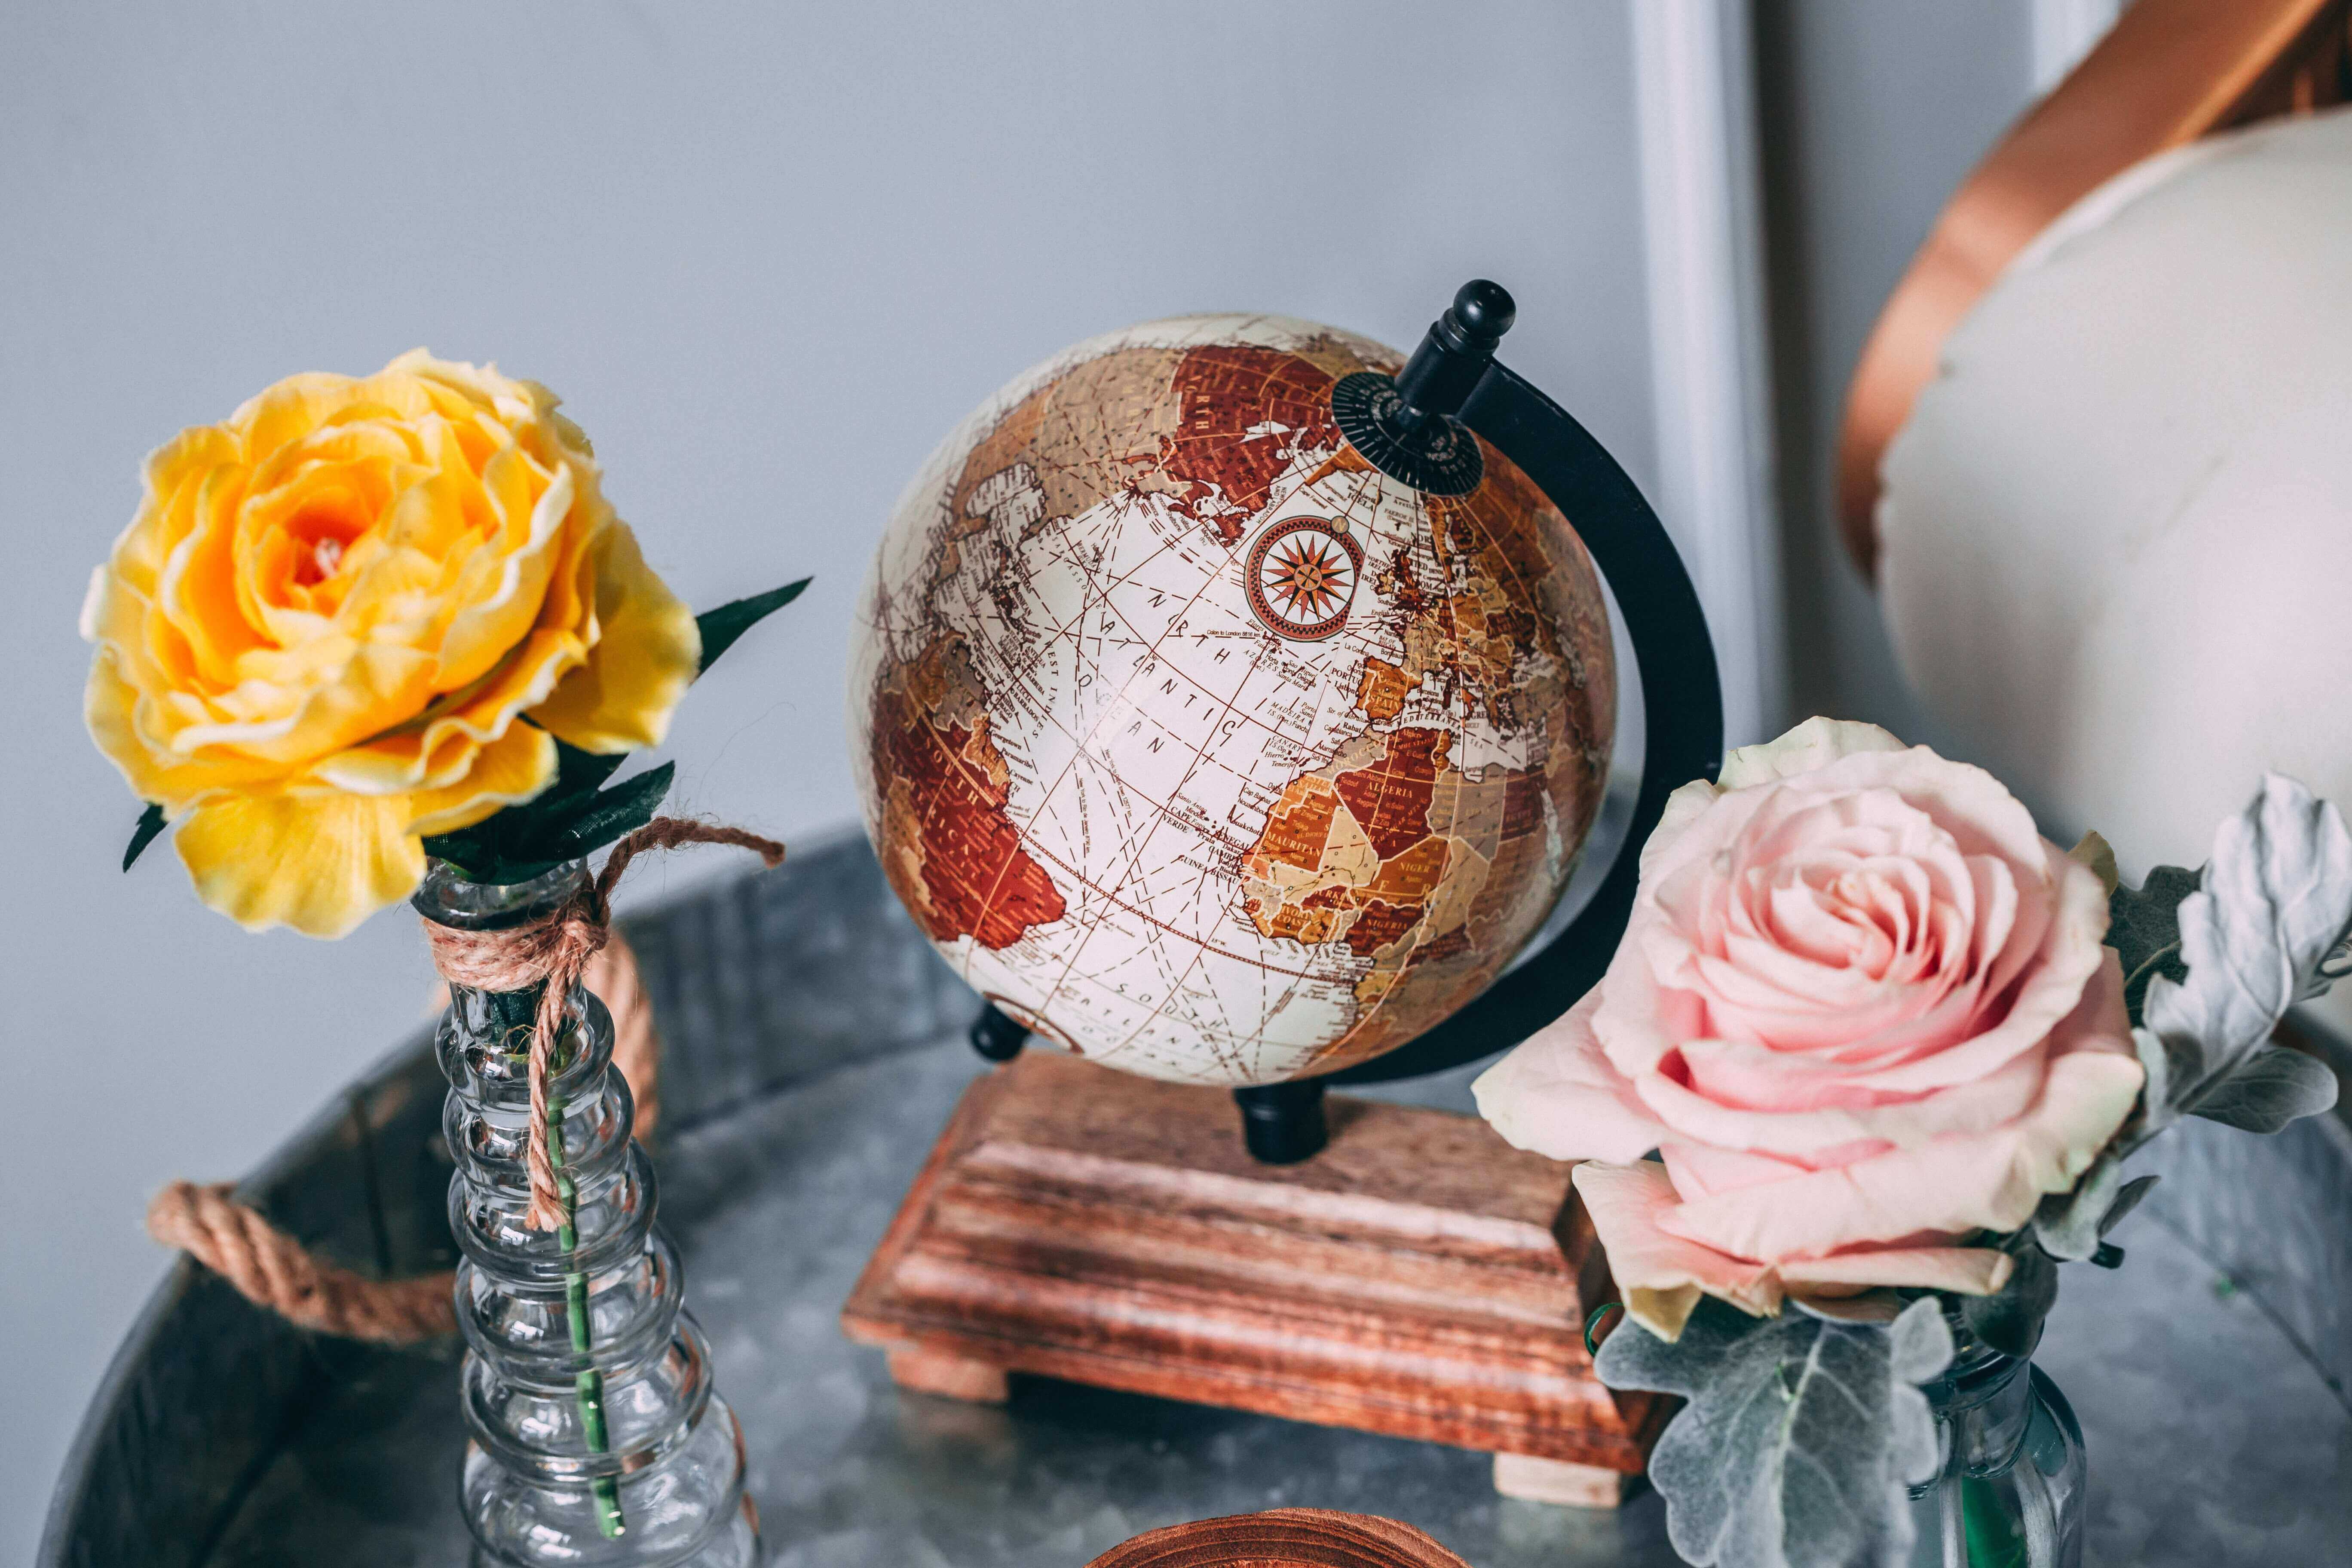 A photograph of a table with a yellow rose, a pink rose and a small antique globe